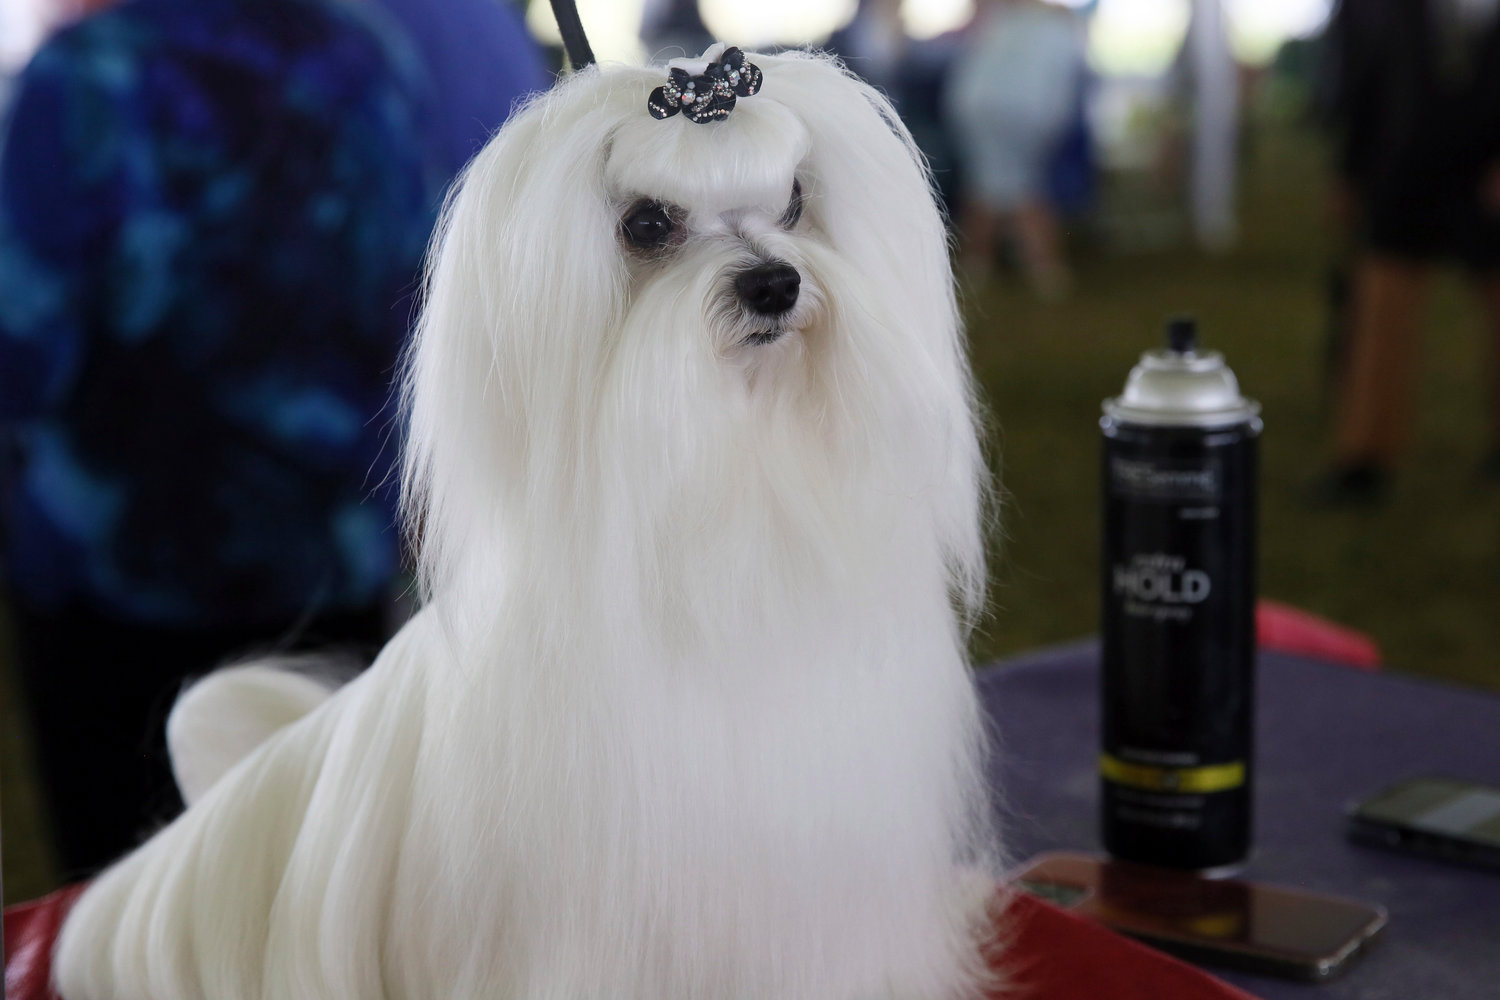 Bentley, a Maltese, waits to compete at the Westminster Kennel Club Dog Show, Tuesday, June 21, 2022, in Tarrytown, N.Y.